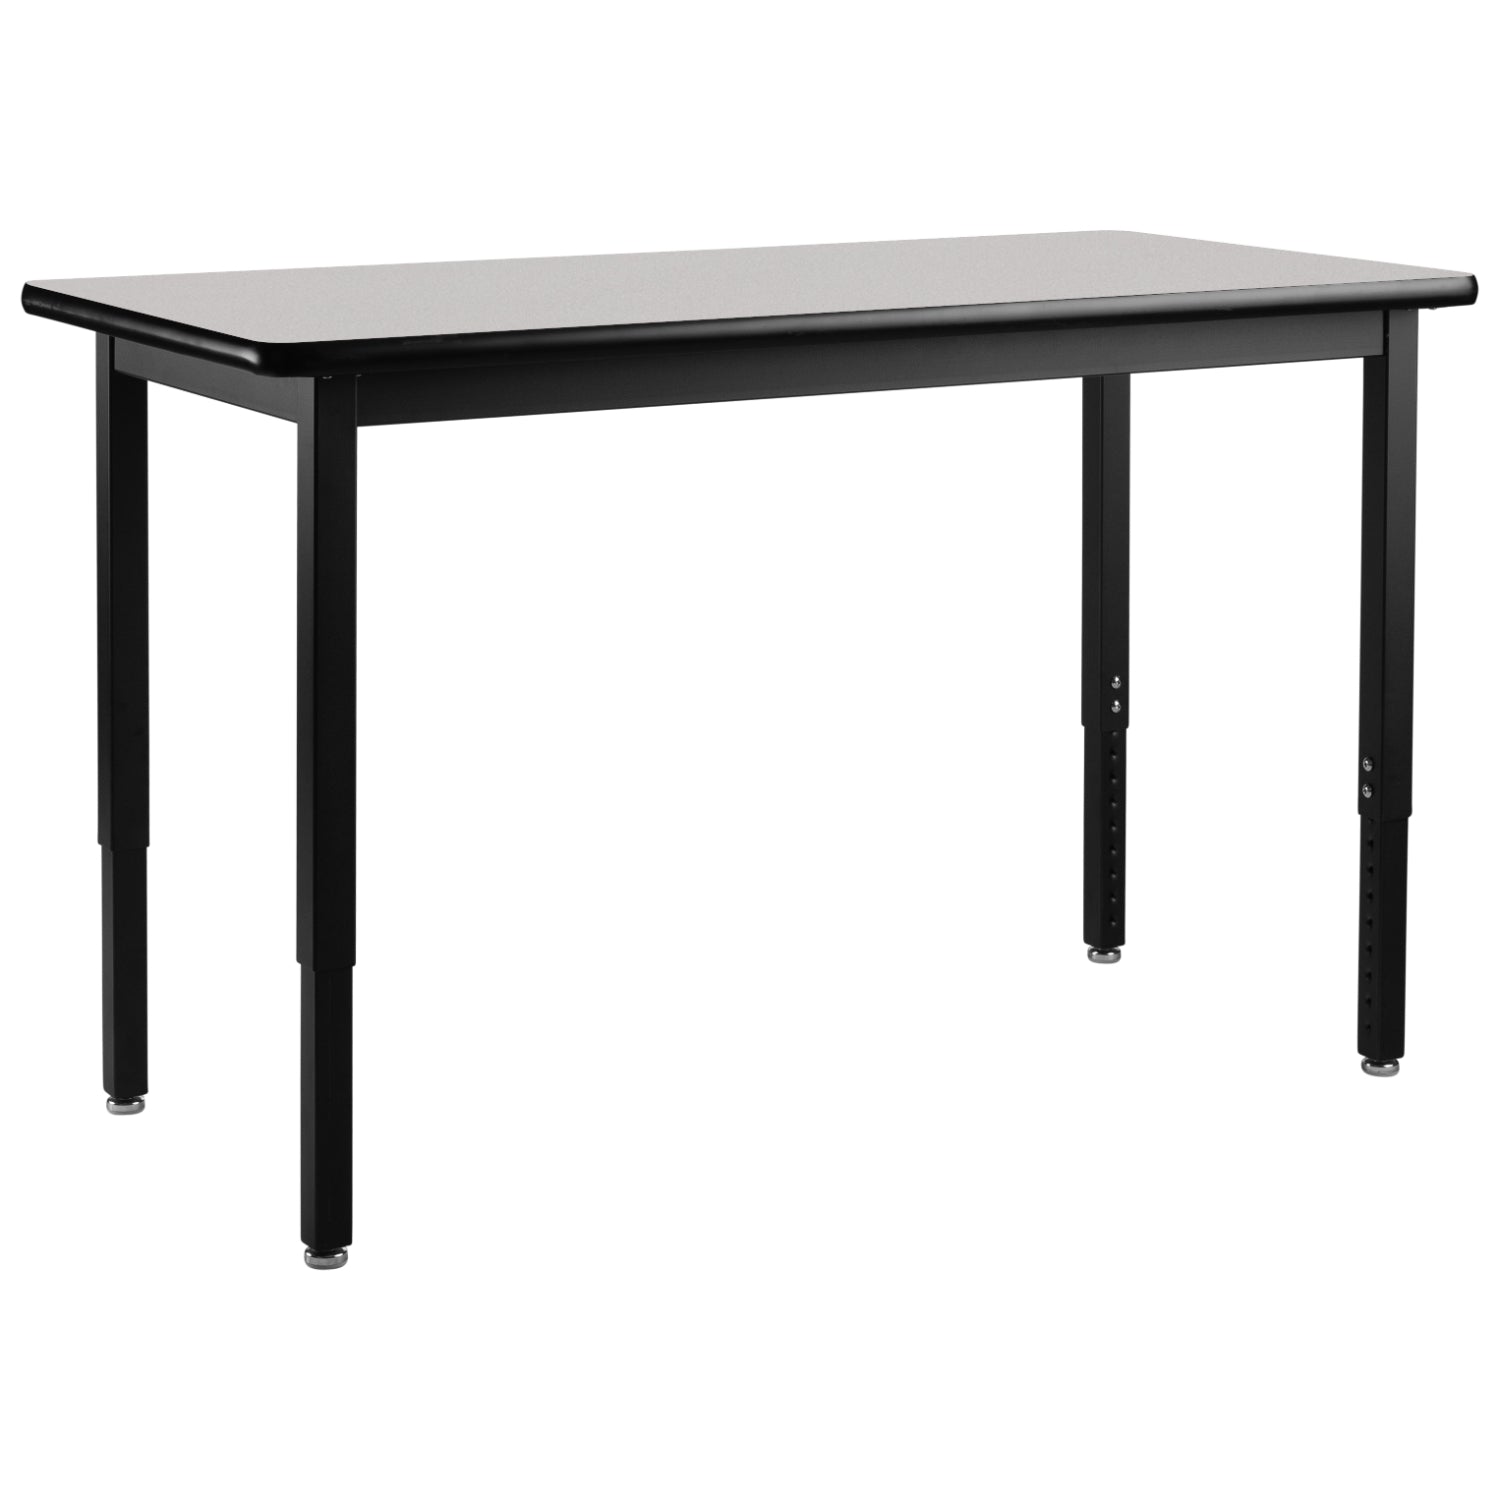 Heavy-Duty Height-Adjustable Utility Table, Black Frame, 18" x 84", Supreme High-Pressure Laminate Top with Black ProtectEdge